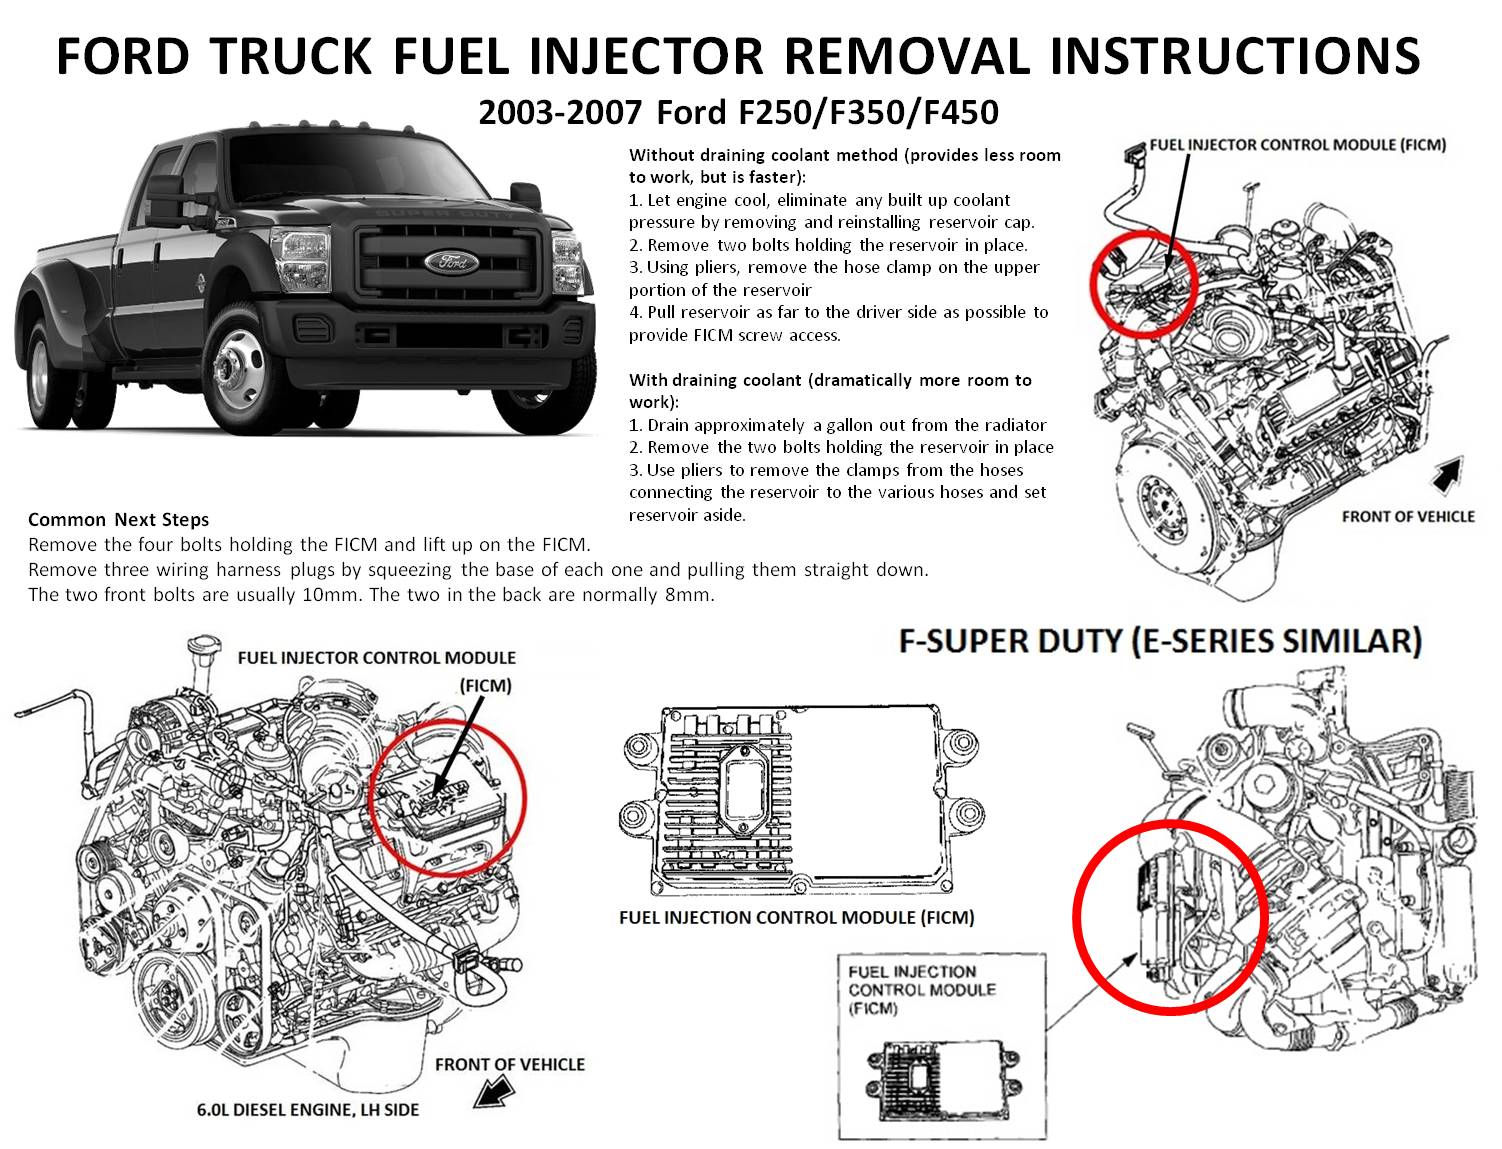 Ford fault code p0611 #8